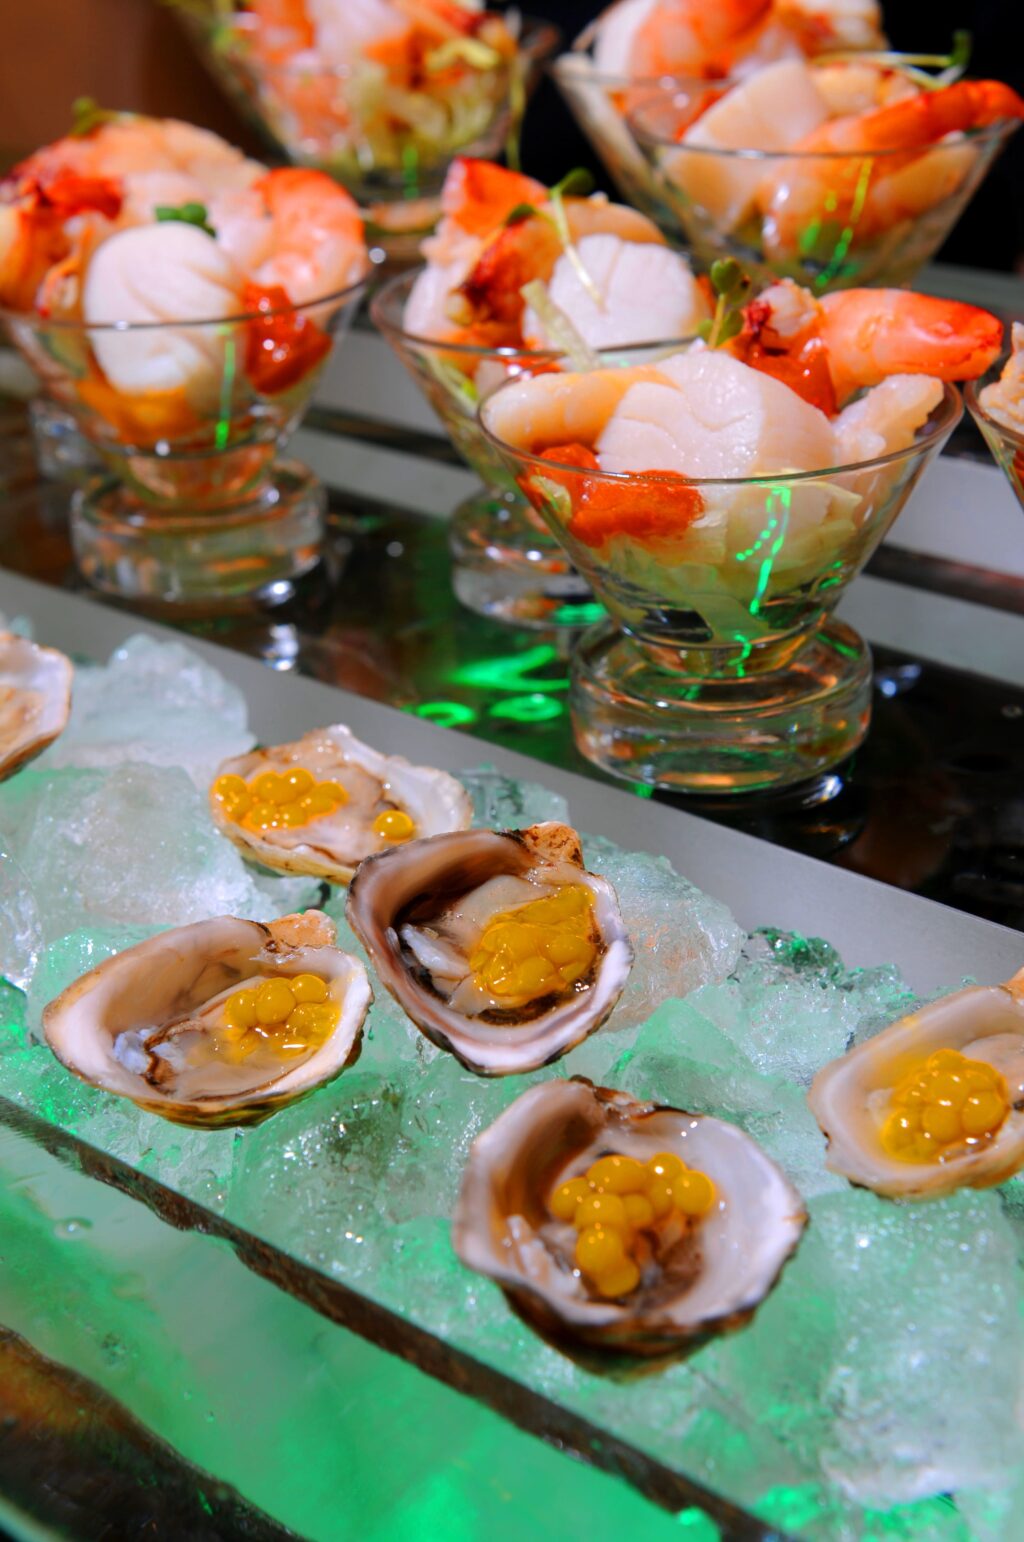 Seafood as part of an event menu